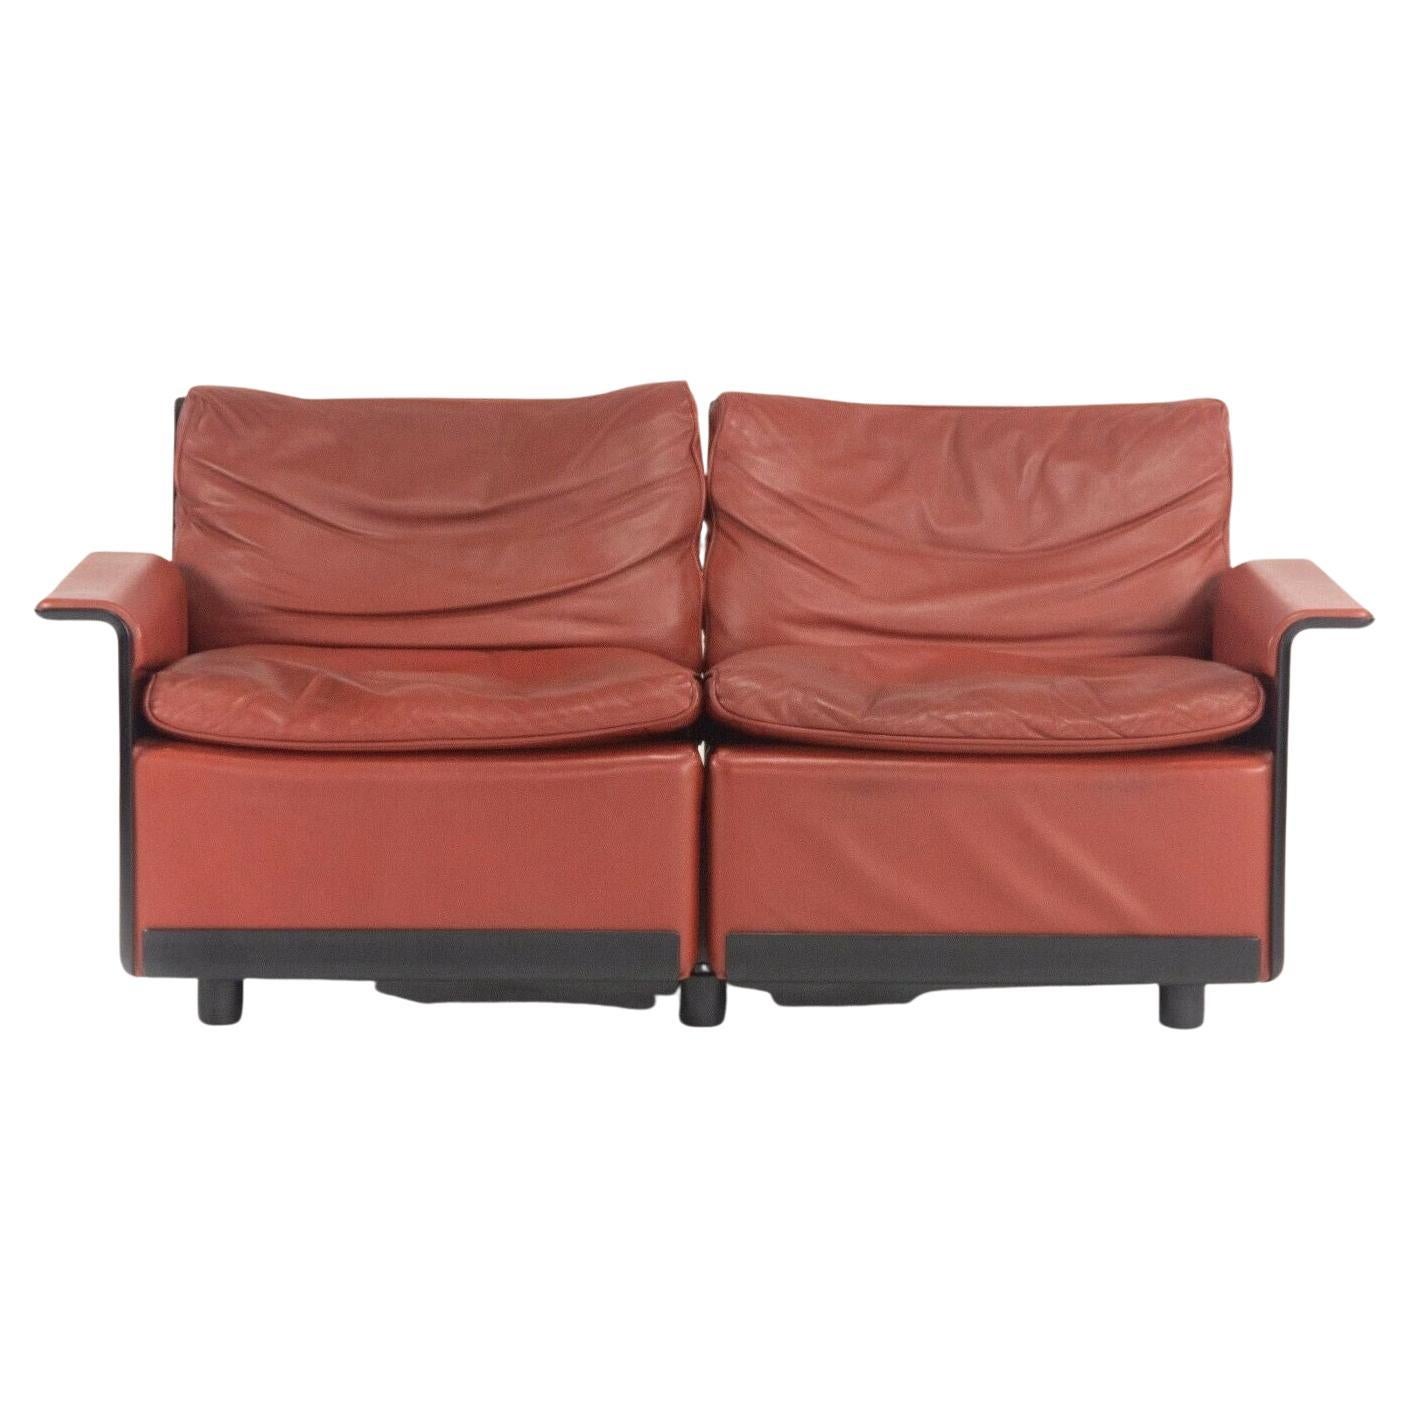 1980s Vintage Dieter Rams for Vitsoe 620 Red Leather and Black Two Seat Settee For Sale